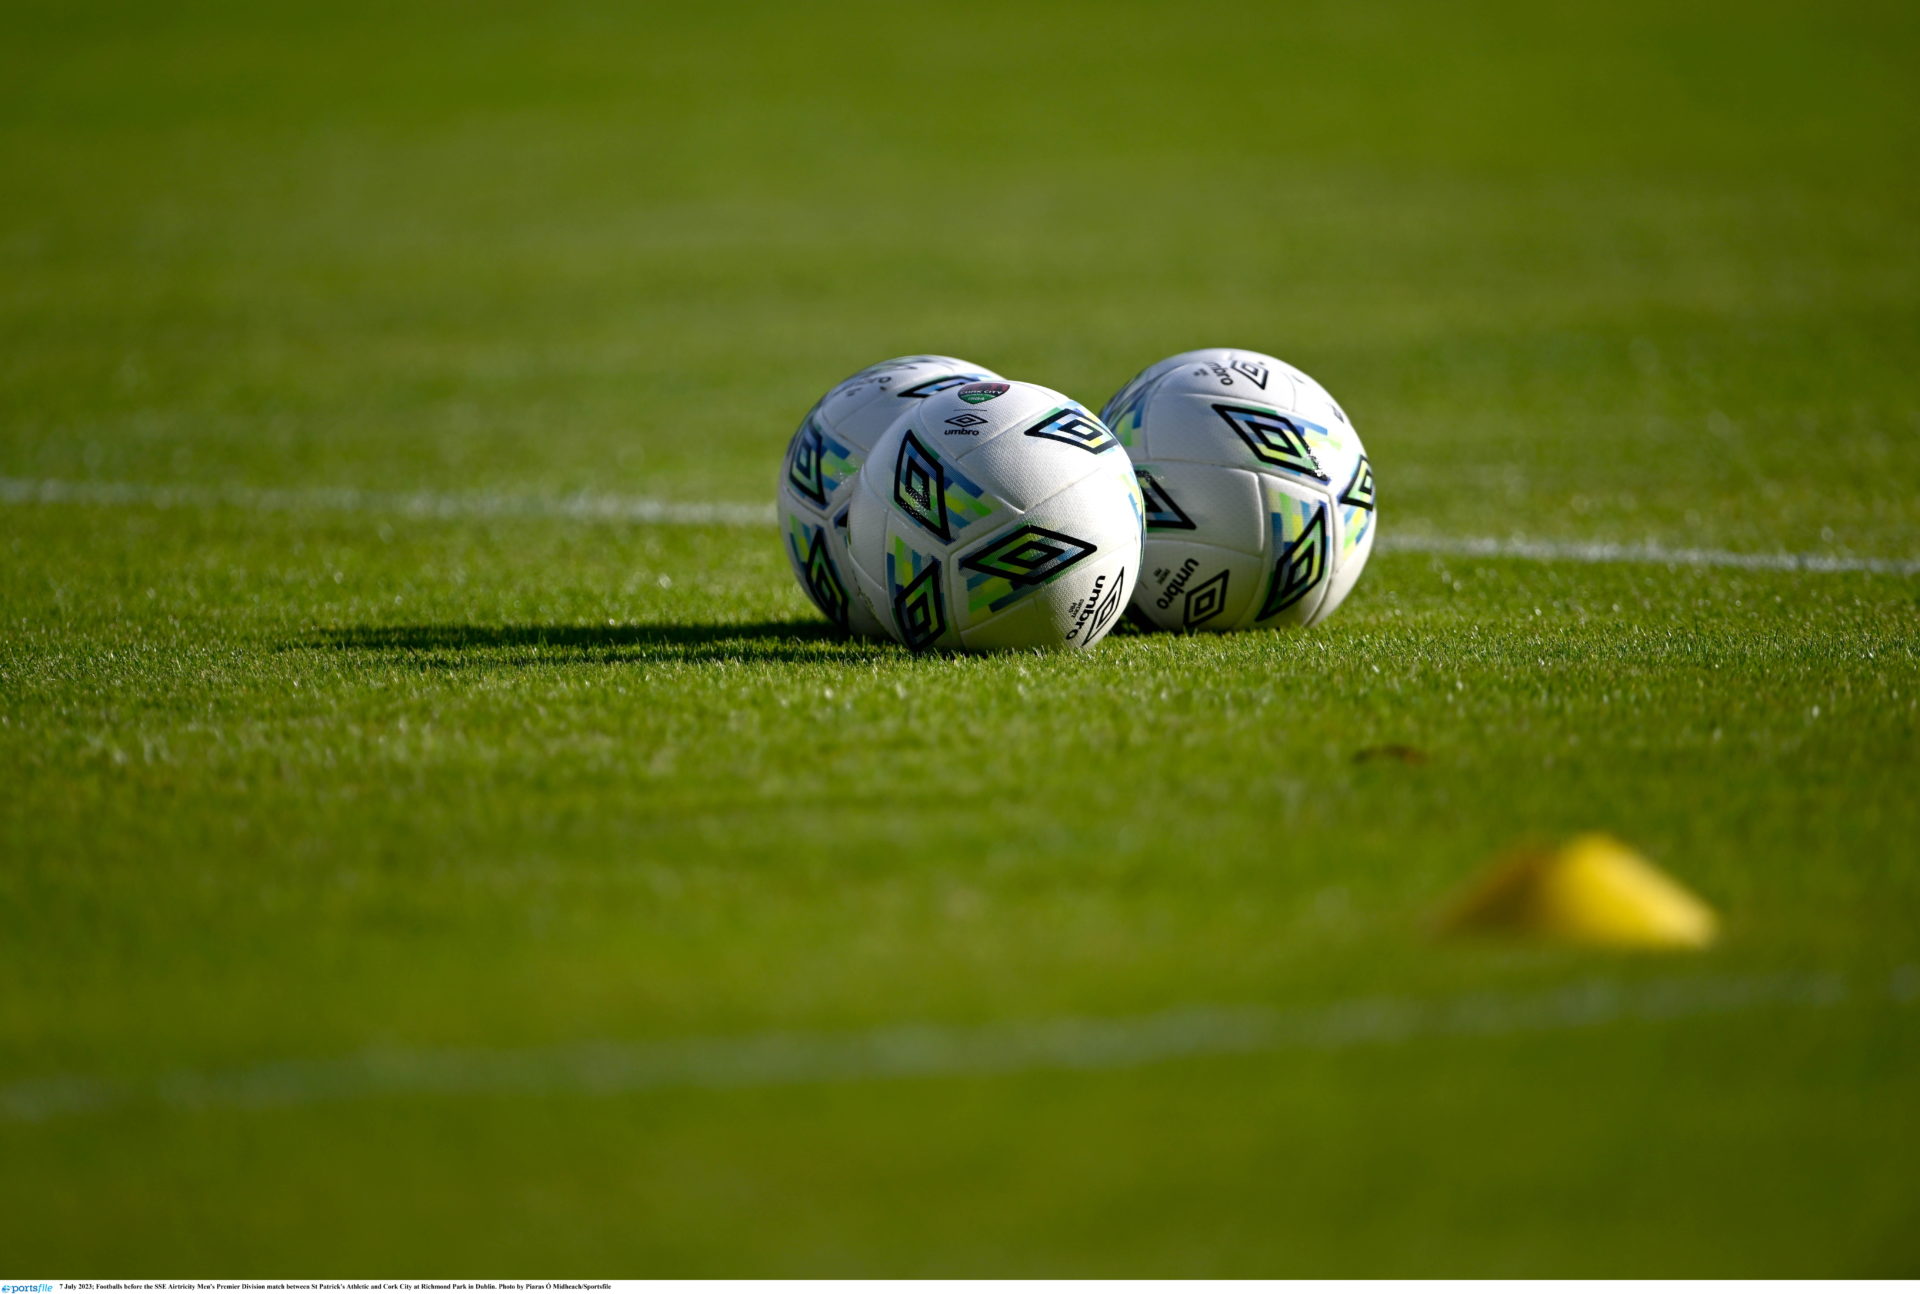 Main image shows footballs on a pitch.